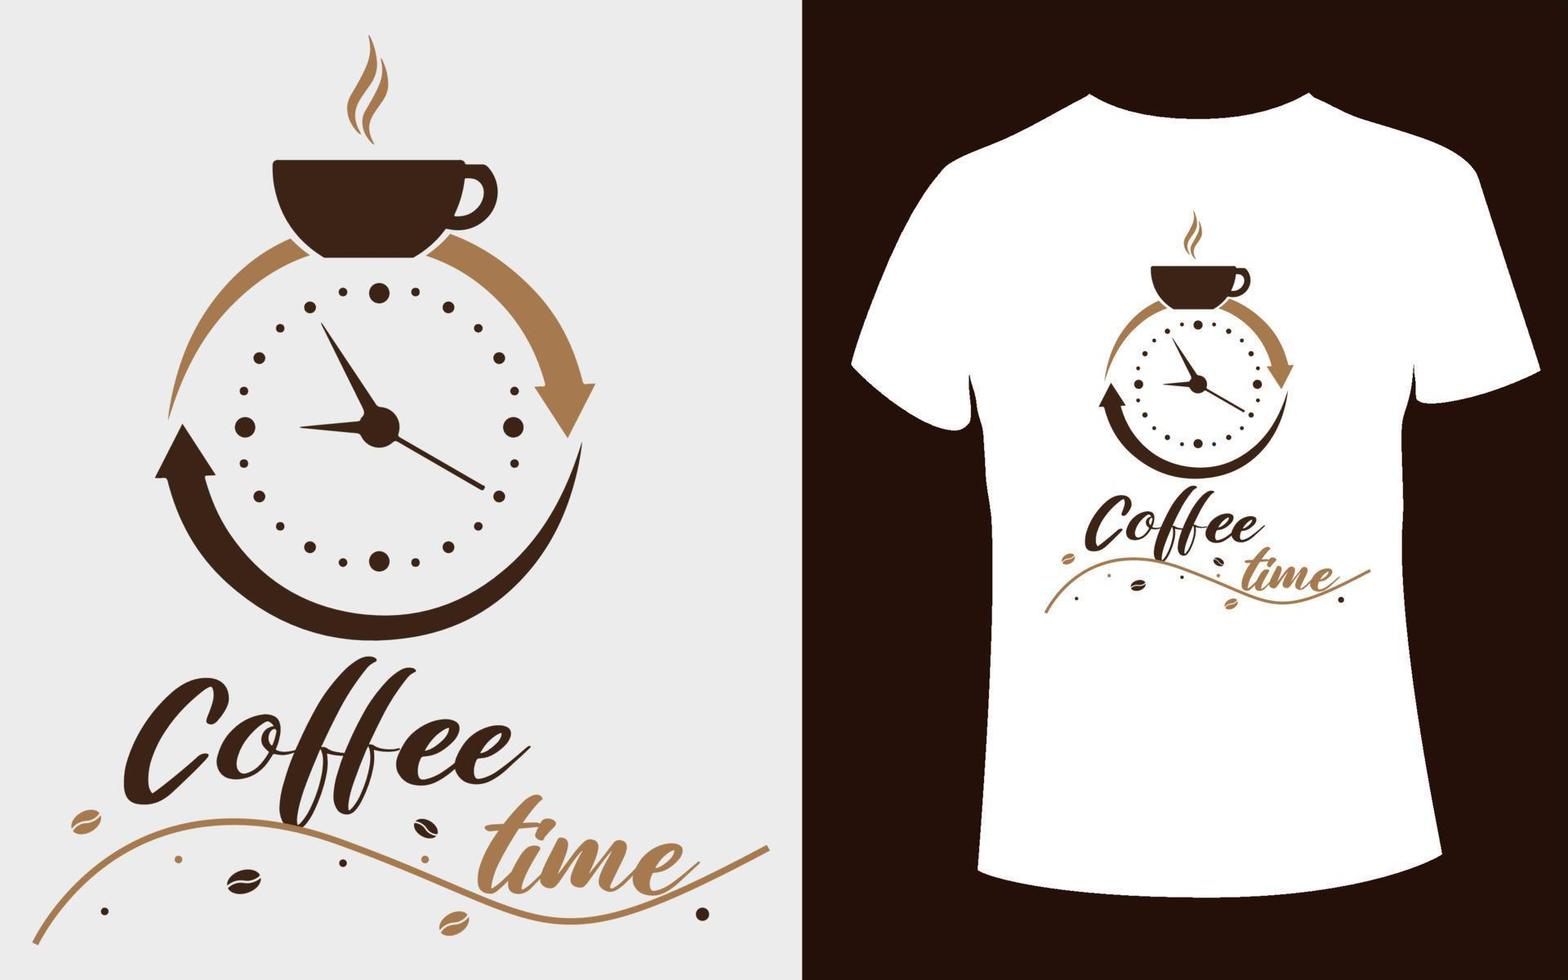 Coffee time t-shirt design with coffee vector